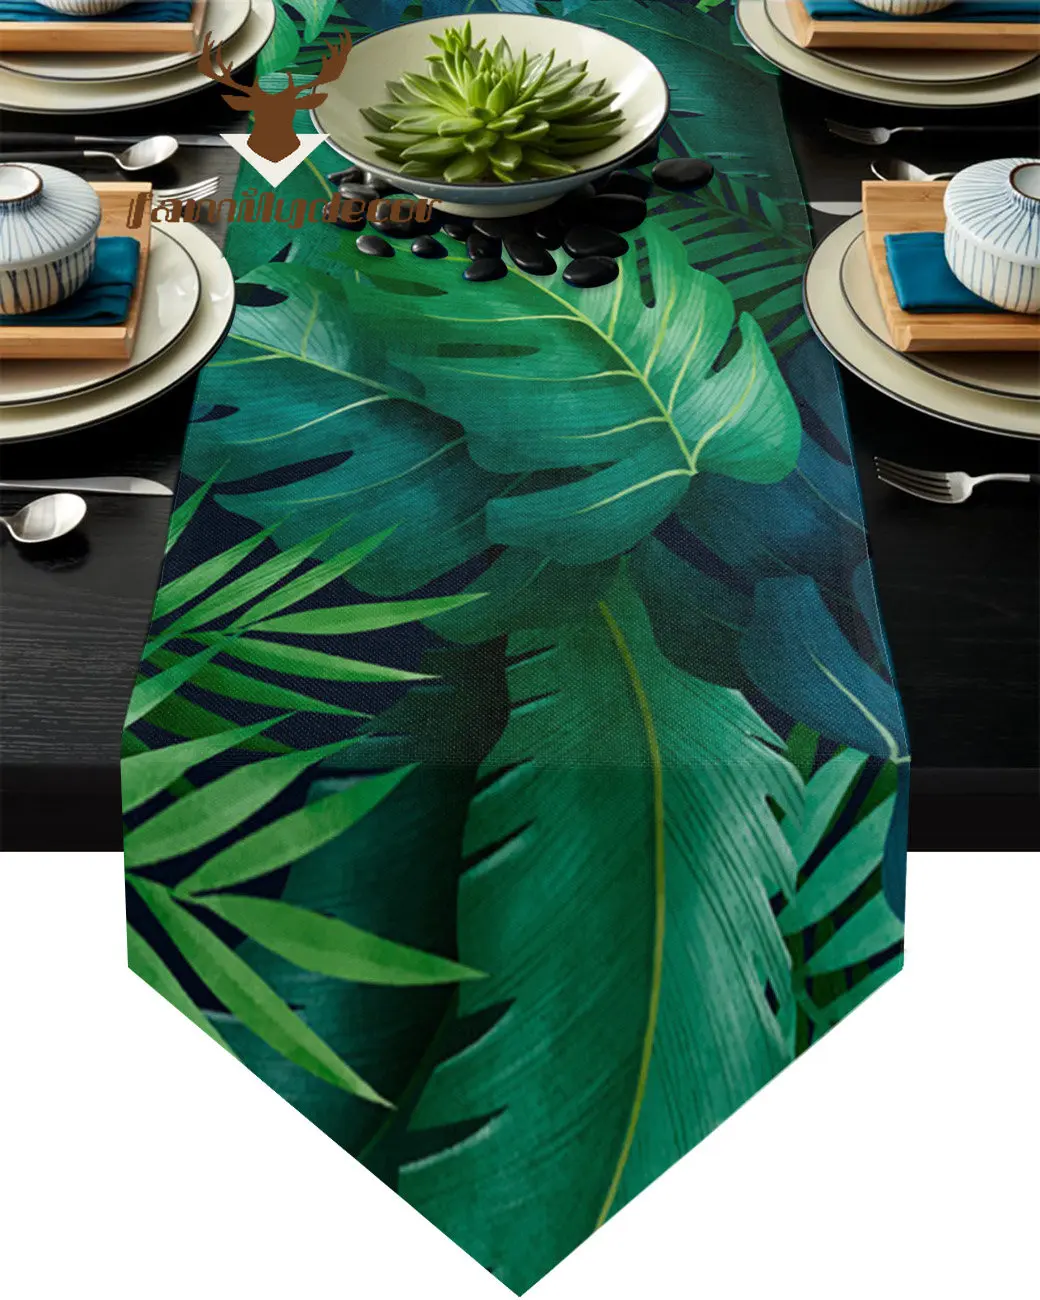 

Green Leaves Plants Tropical Jungle Table Runner Rustic Boho Wedding Decoration Tablecloth Party House Kitchen Dining Placemat